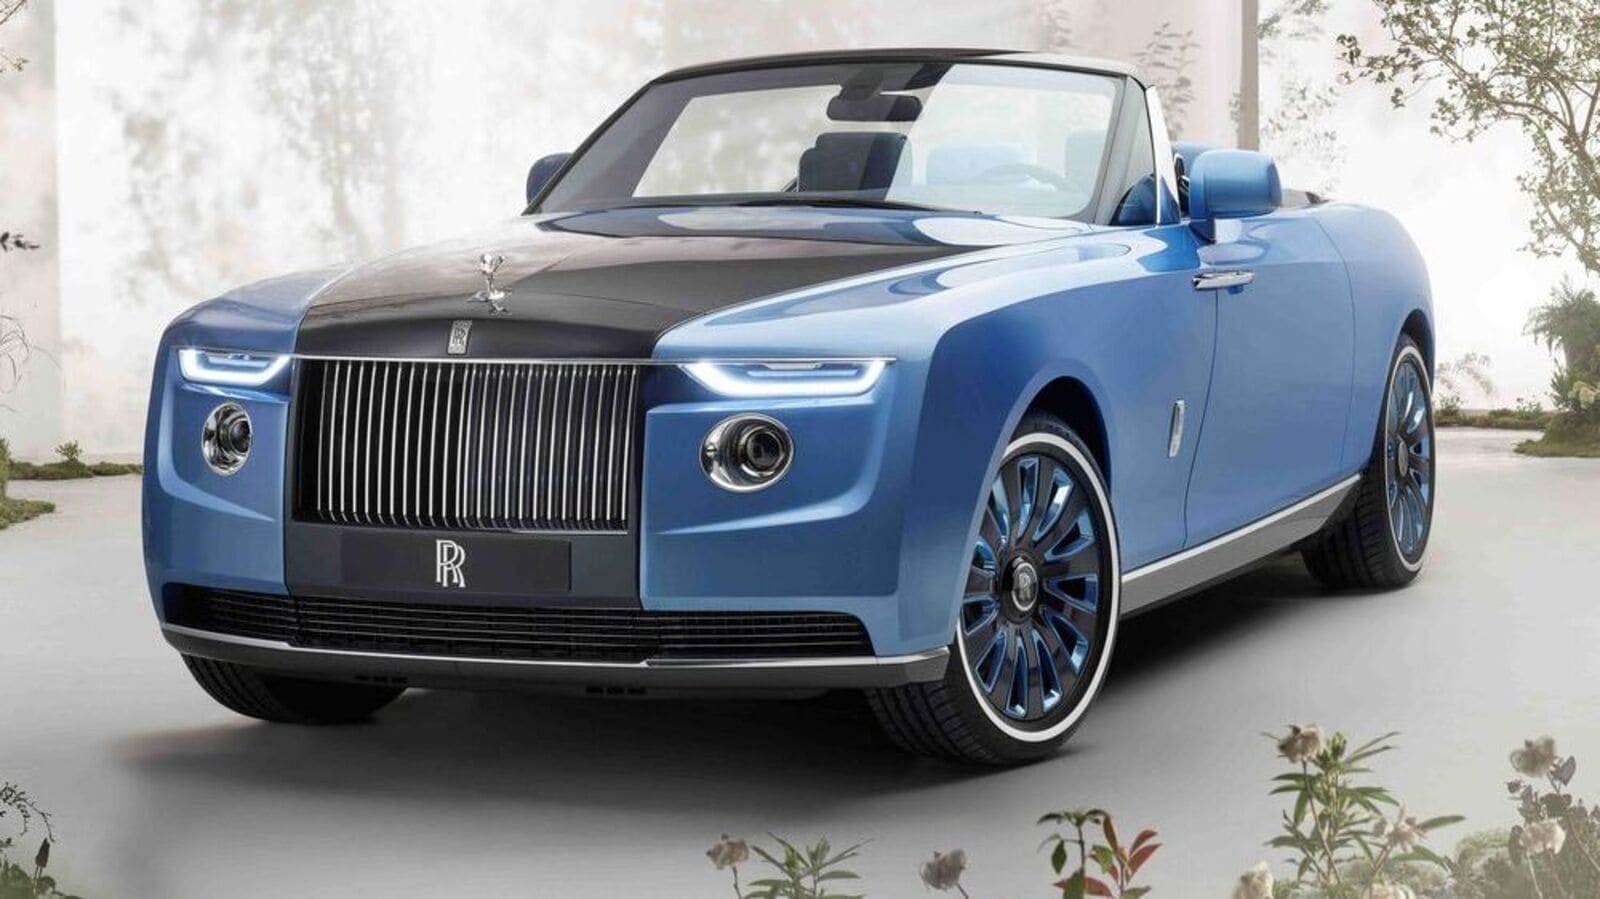 RollsRoyce to switch to full electric cars by 2040  Financial Times